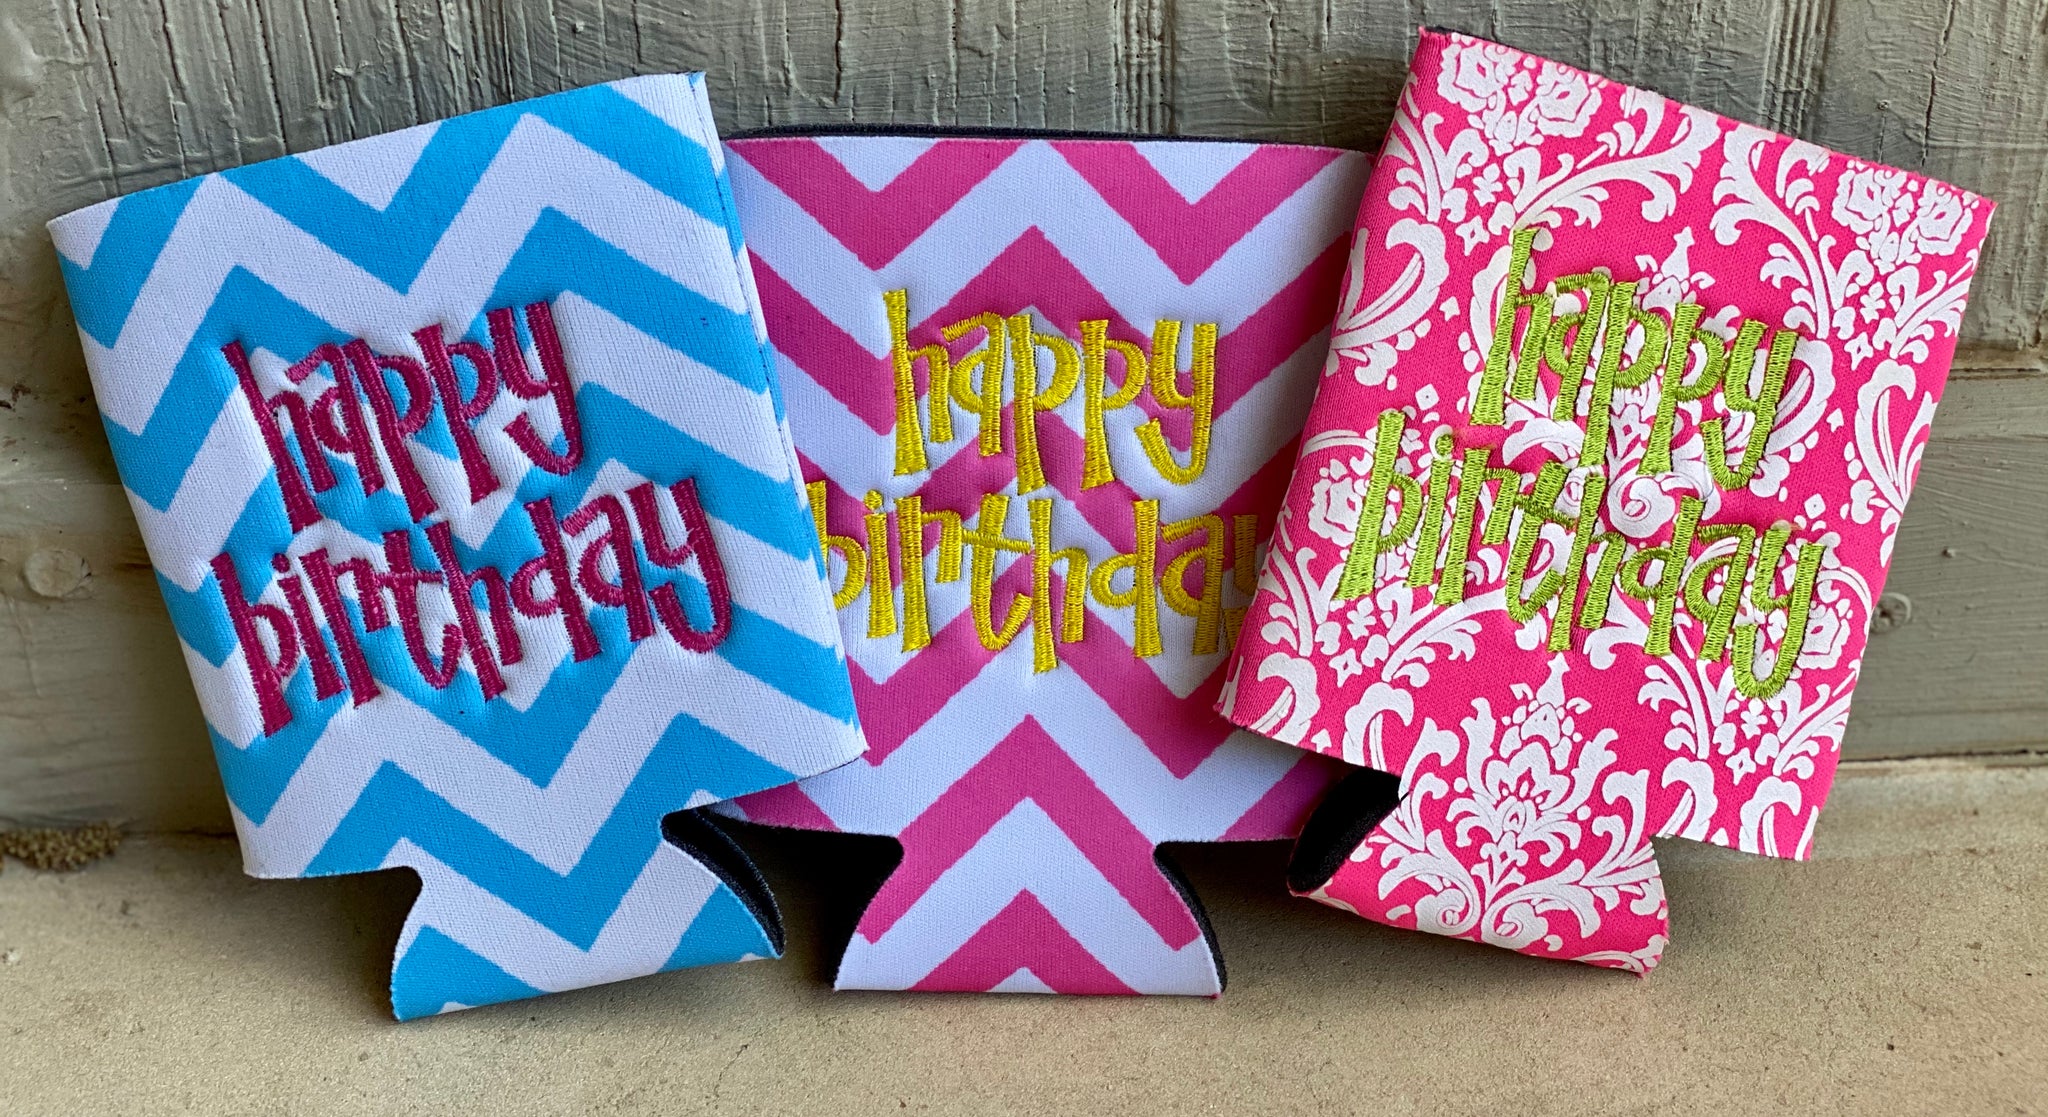 Happy Birthday Free Printable Gift Tags – FAKING IT FABULOUS